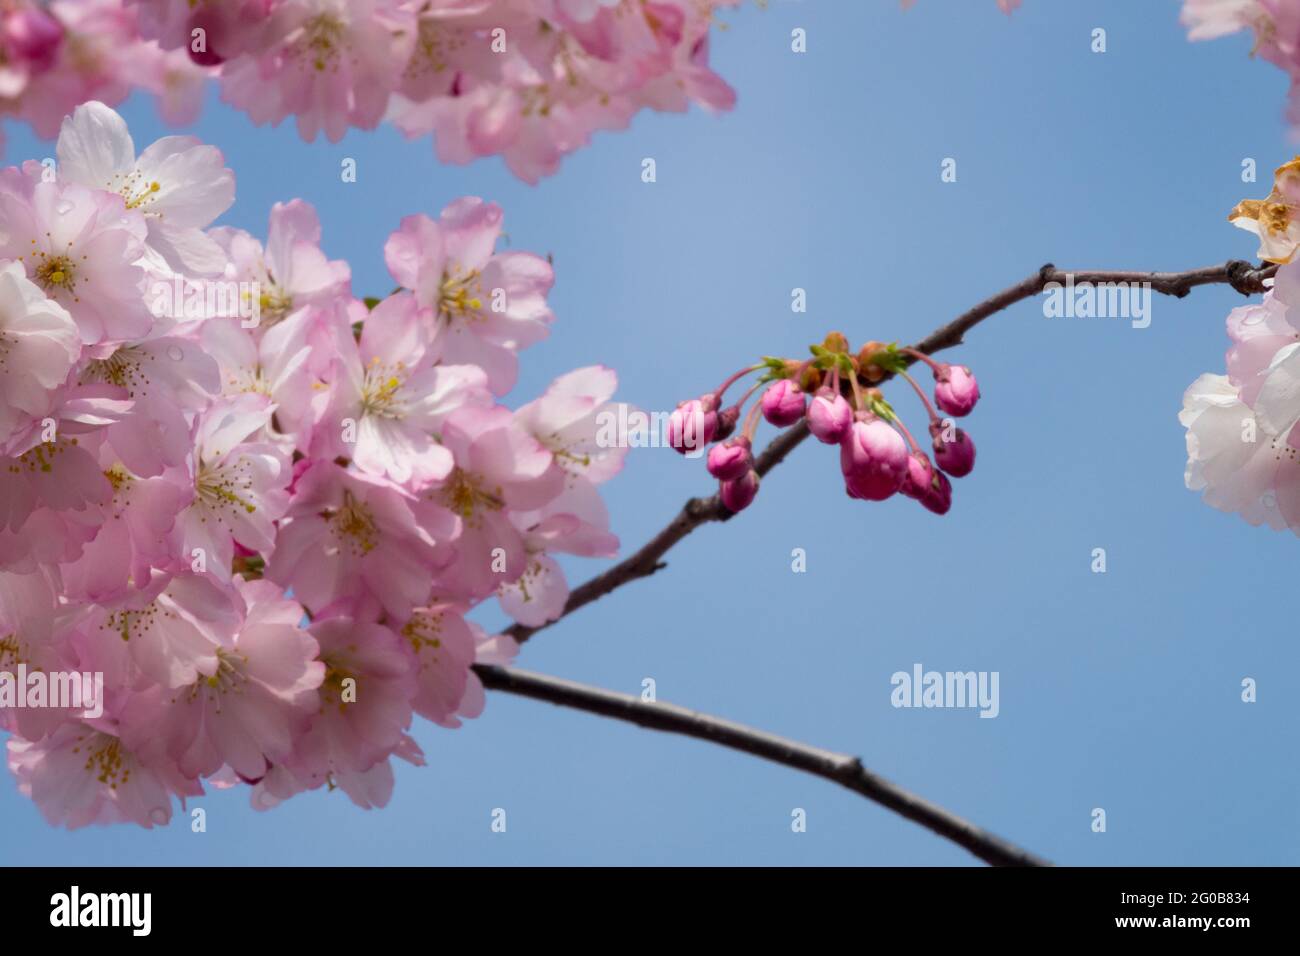 Cherry tree blossom, rose spring blooms on twigs Stock Photo